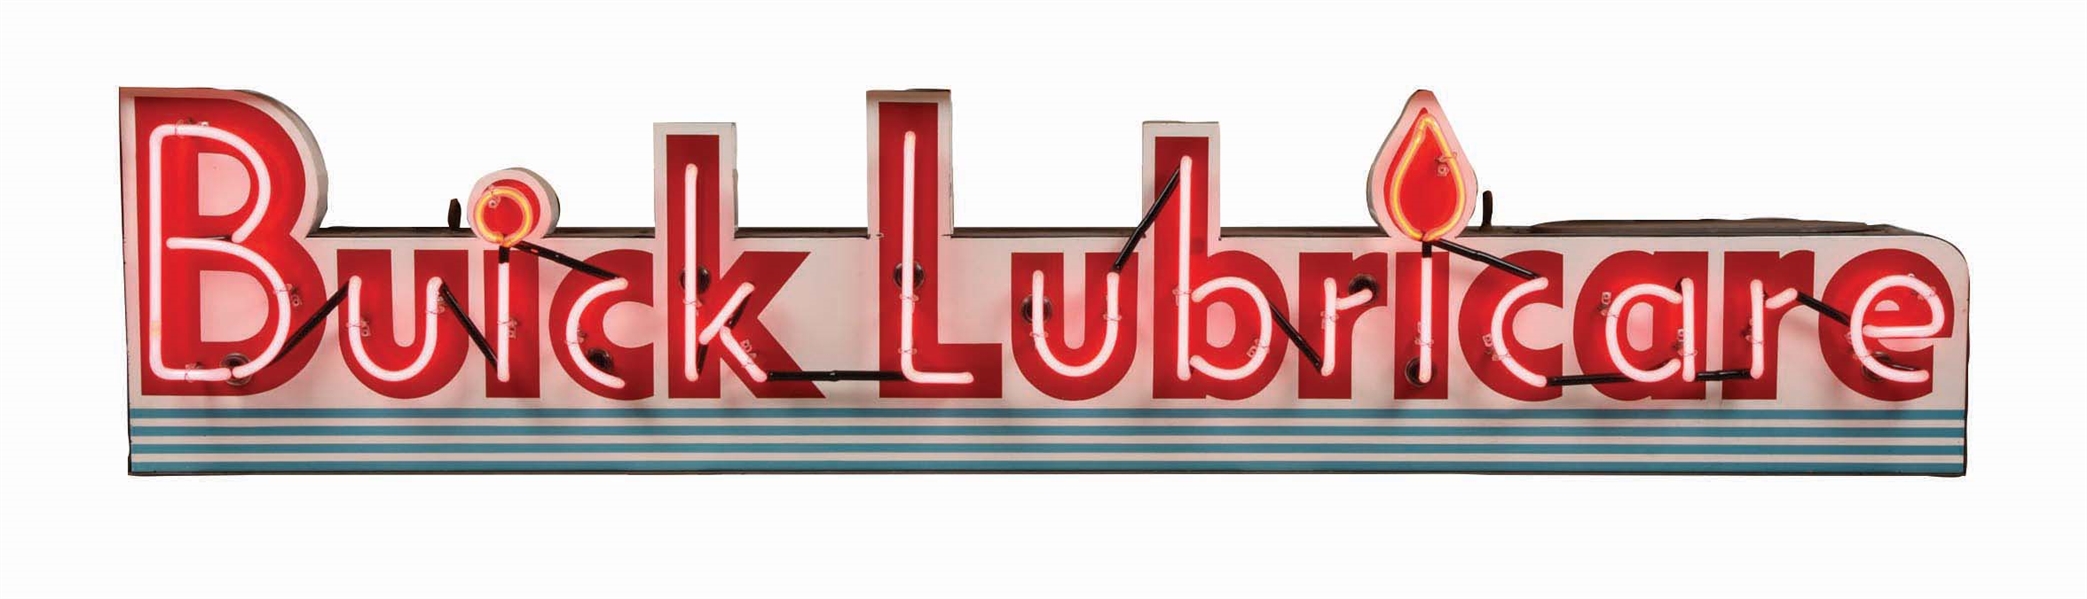 OUTSTANDING BUICK LUBRICARE PORCELAIN NEON SIGN W/ COOKIE CUTTER EDGE. 